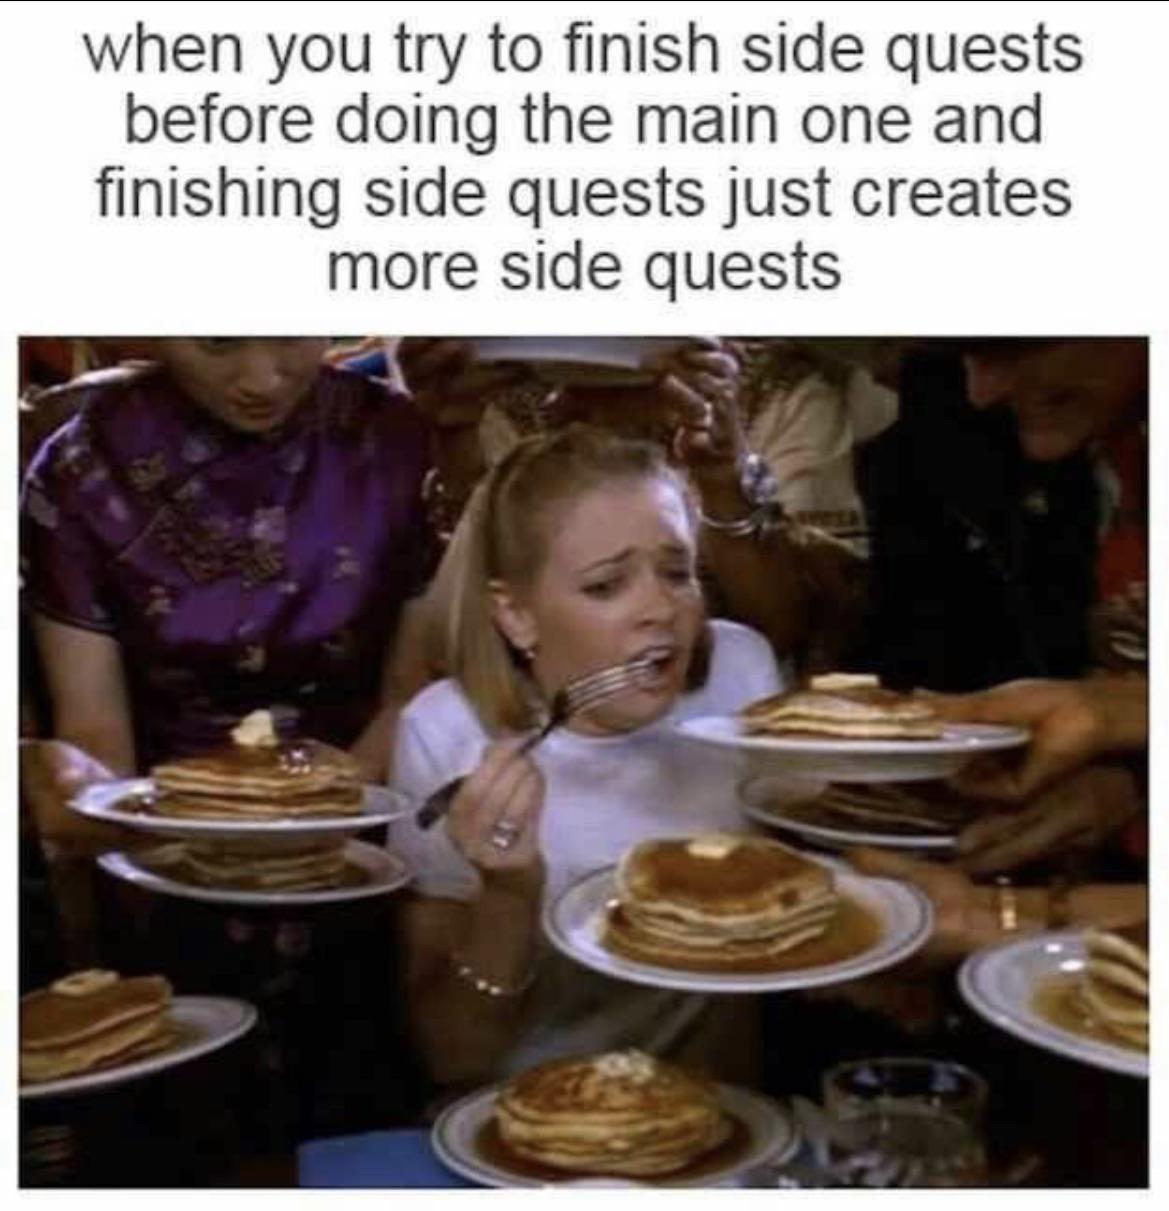 funny memes - meme side quests - when you try to finish side quests before doing the main one and finishing side quests just creates more side quests